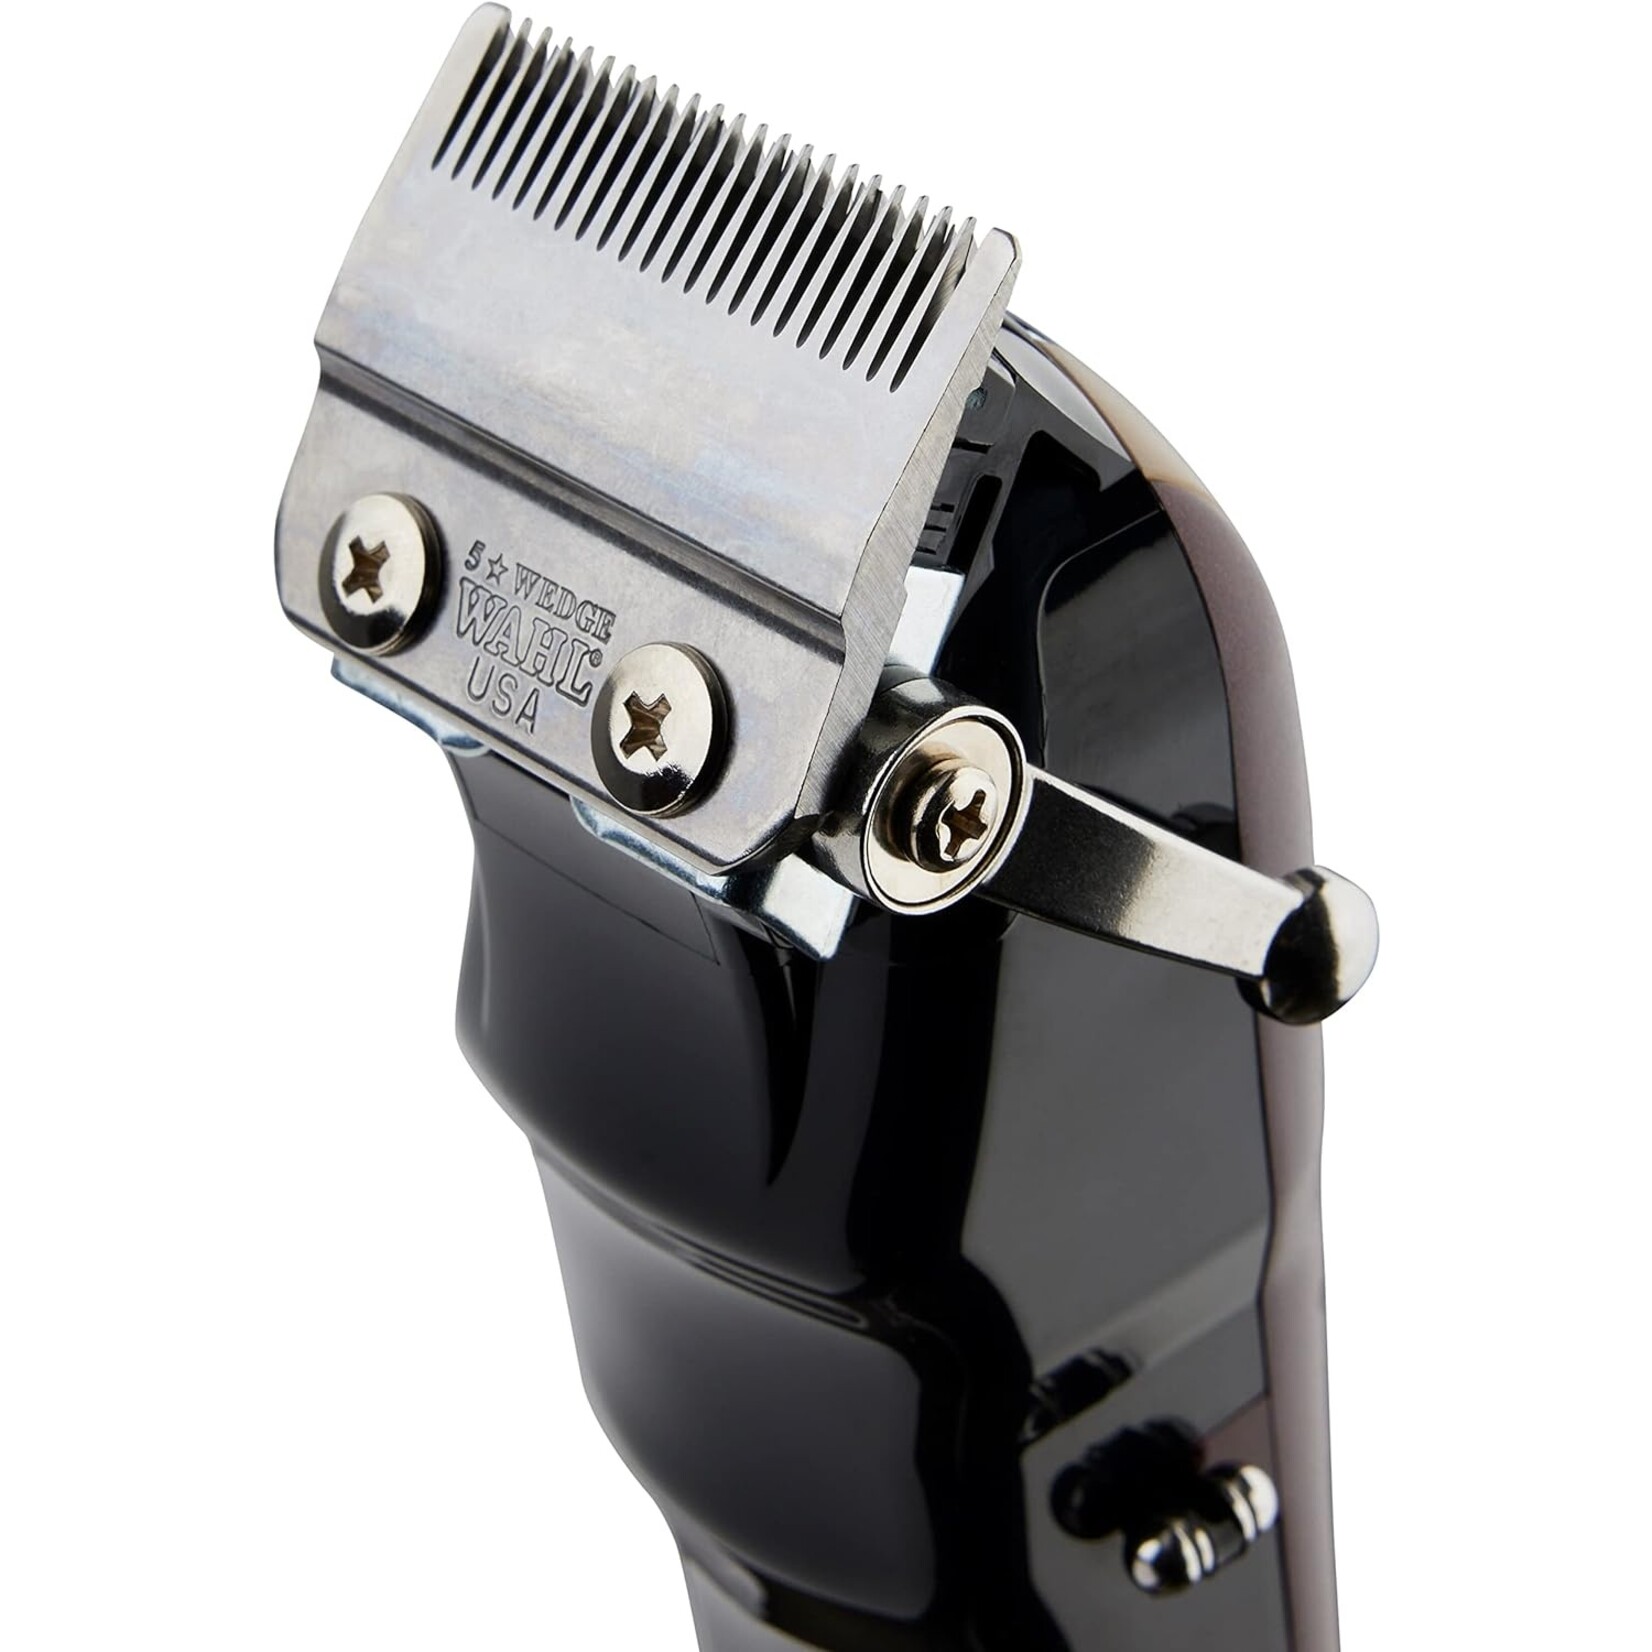 Wahl Pro Wahl - Cordless 5 star legend hair clipper